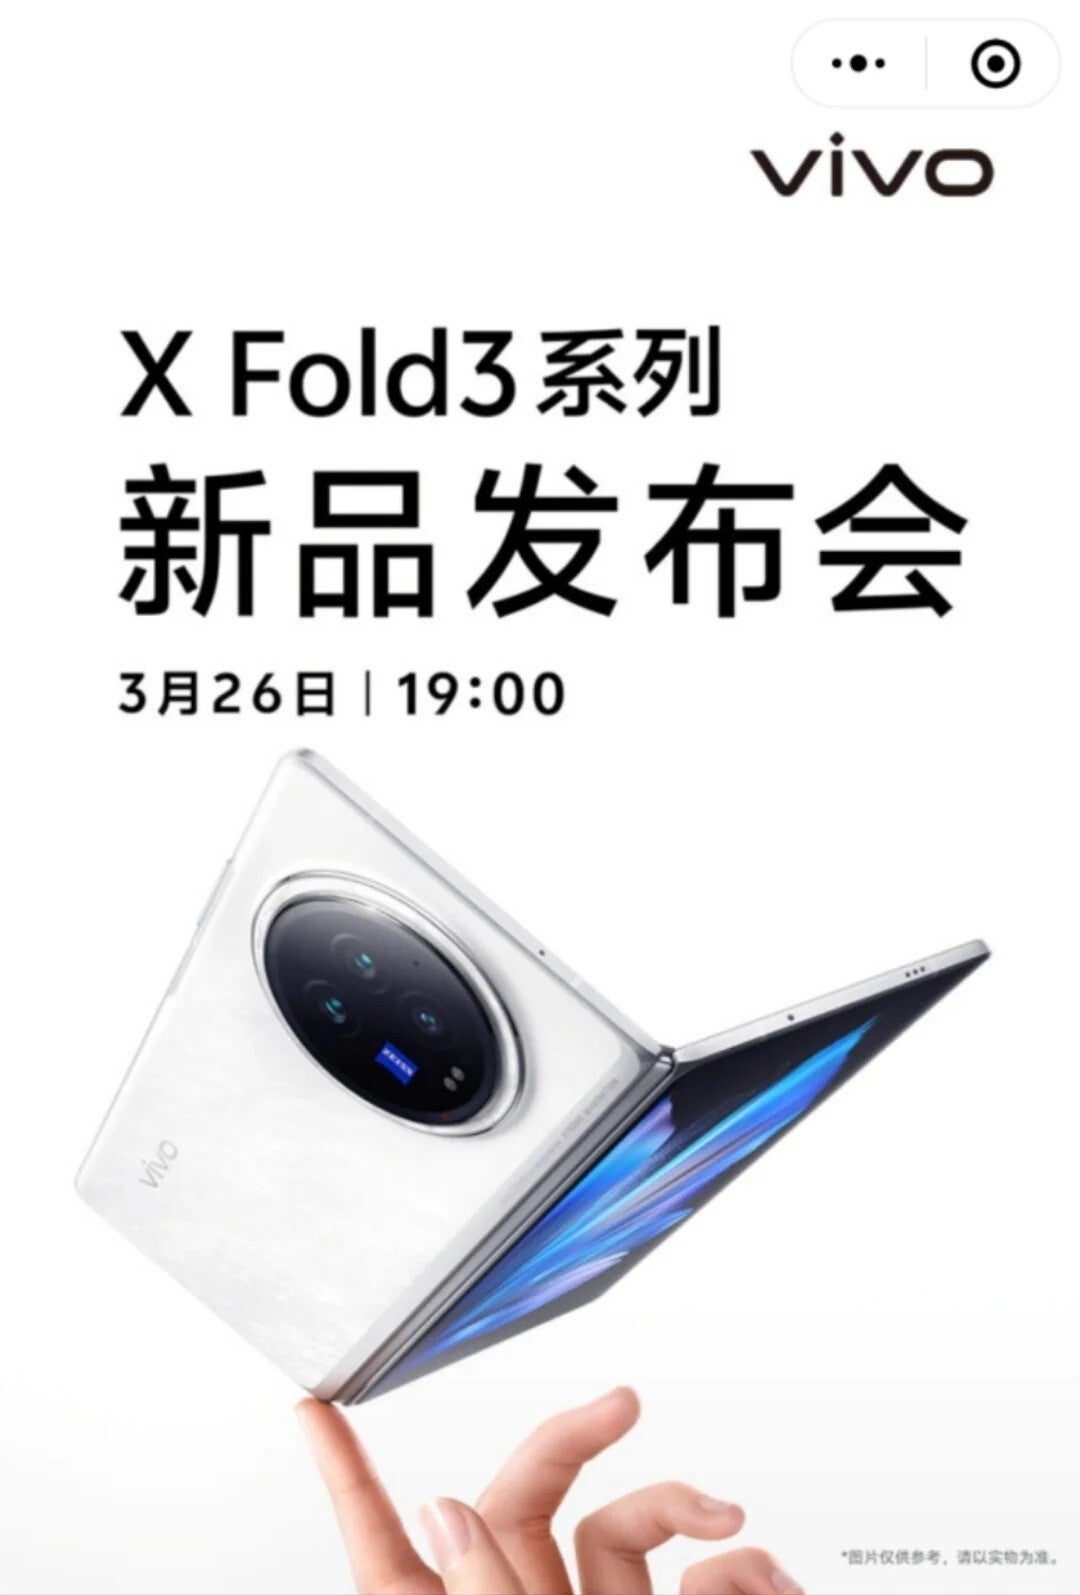 Vivo X Fold 3 series expected to launch in just over a week: find out the exact date